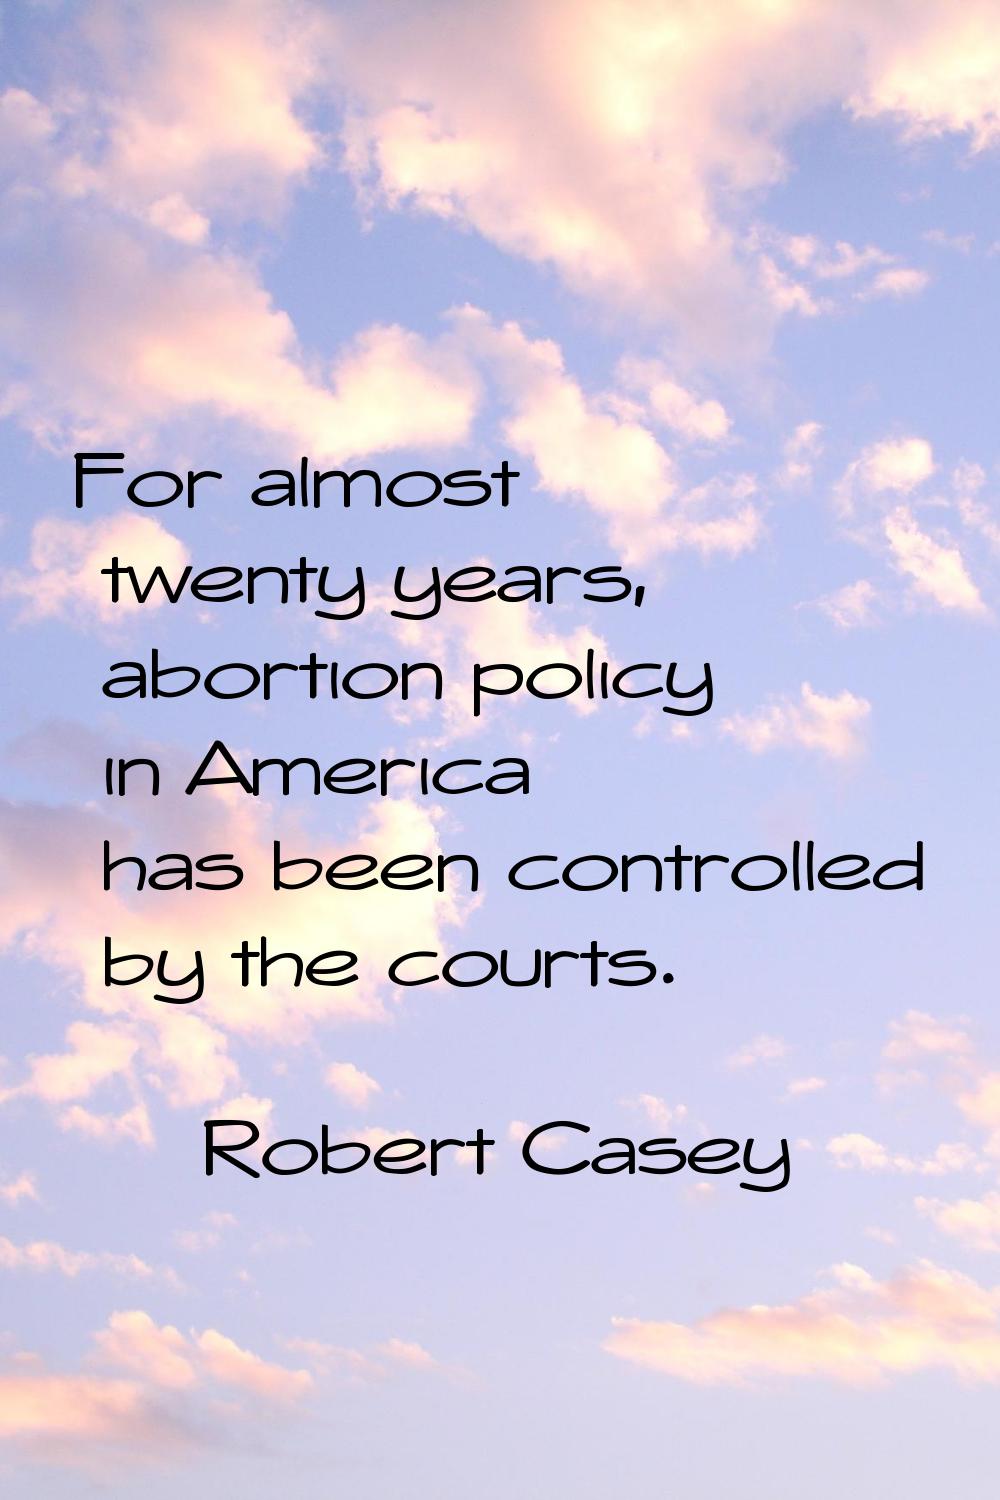 For almost twenty years, abortion policy in America has been controlled by the courts.